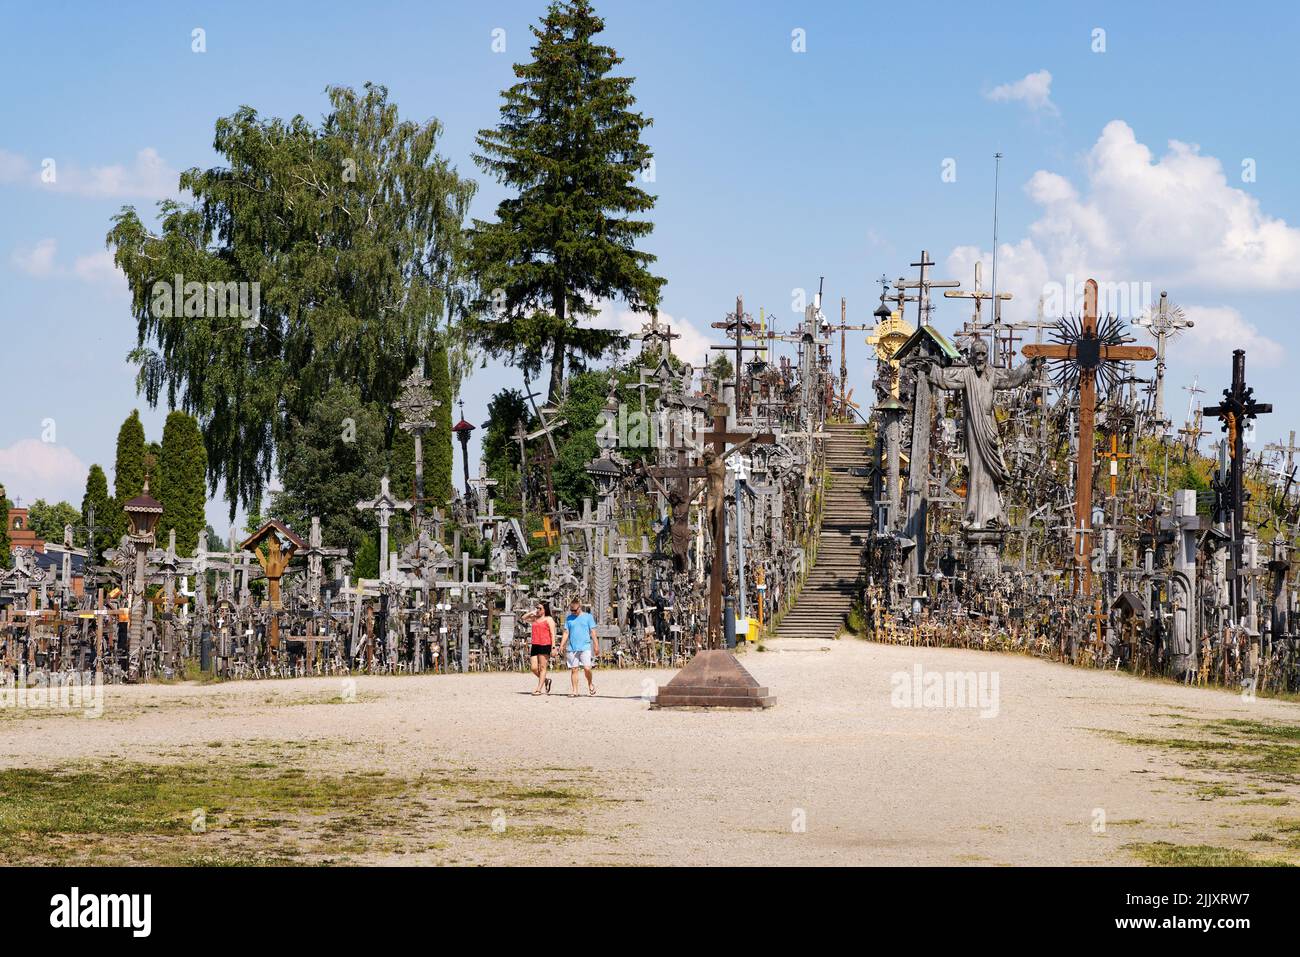 Lithuania travel; Visitors at the Hill of Crosses, Lithuania, a site of religious pilgrimage and tourist attraction, Siauliai, Lithuania, Europe Stock Photo